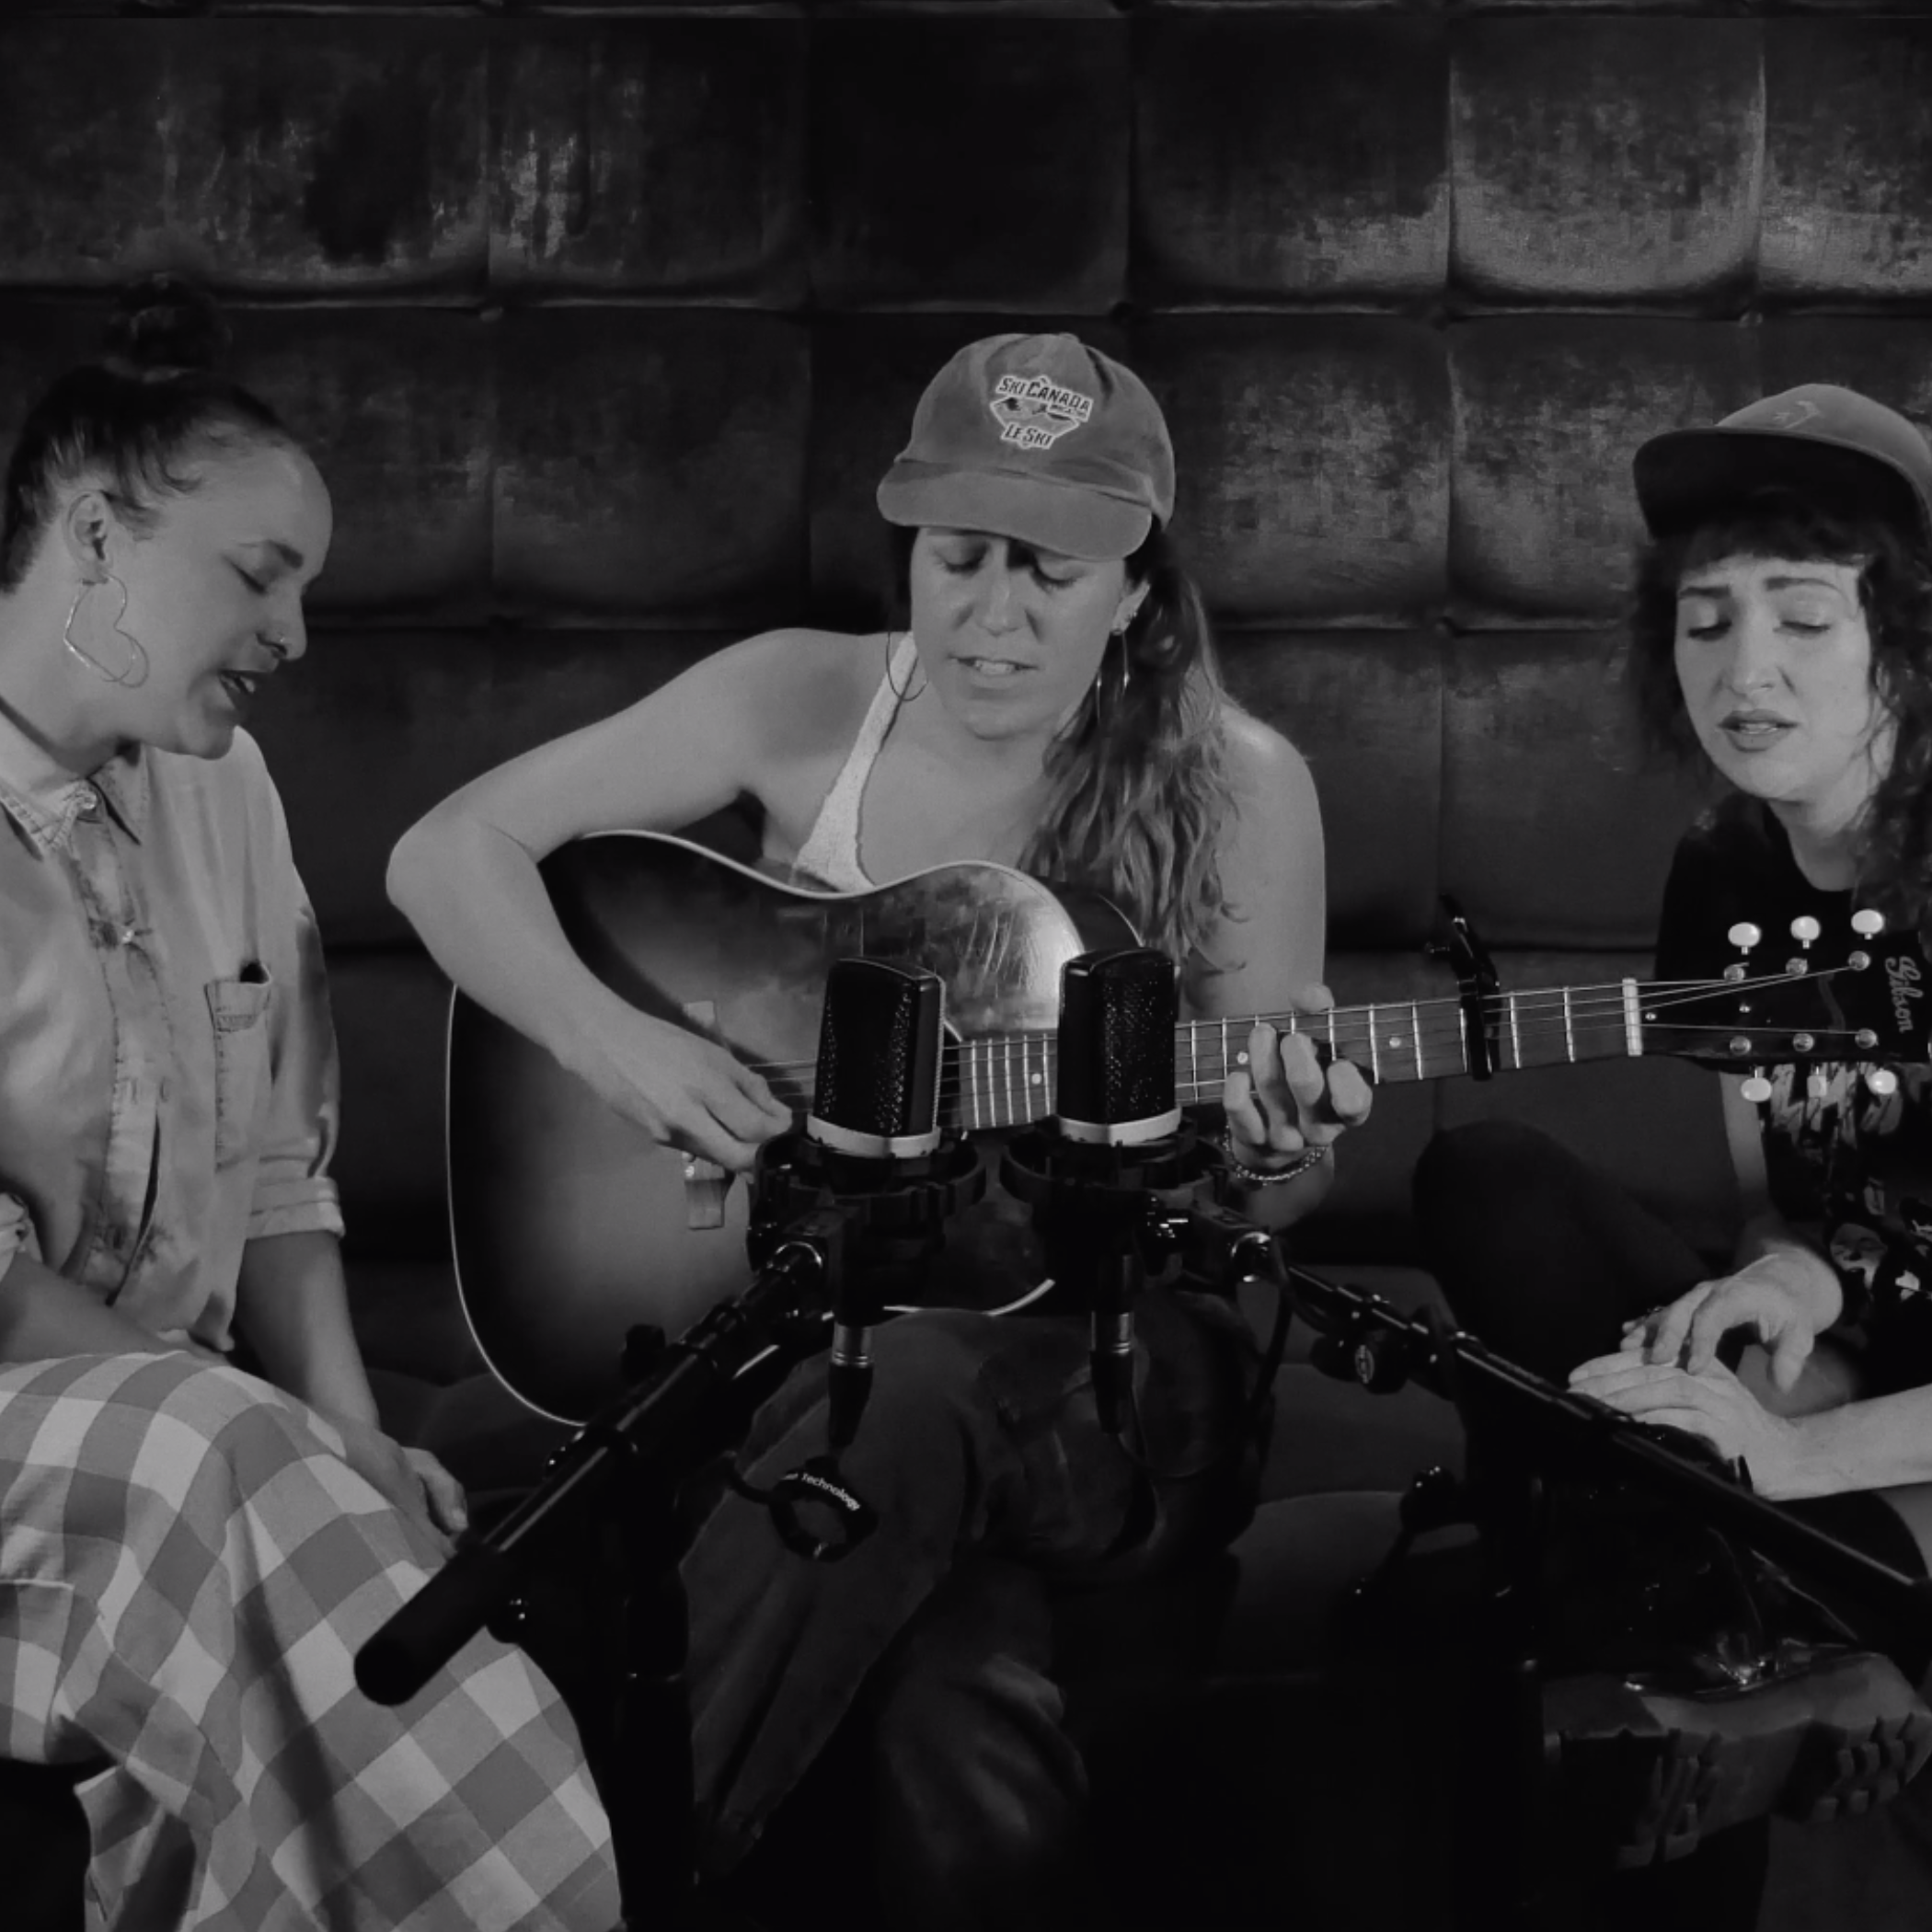 WATCH: Clayton Mathews featuring Handsome Lady Records Club, 'Courthouse Steps'